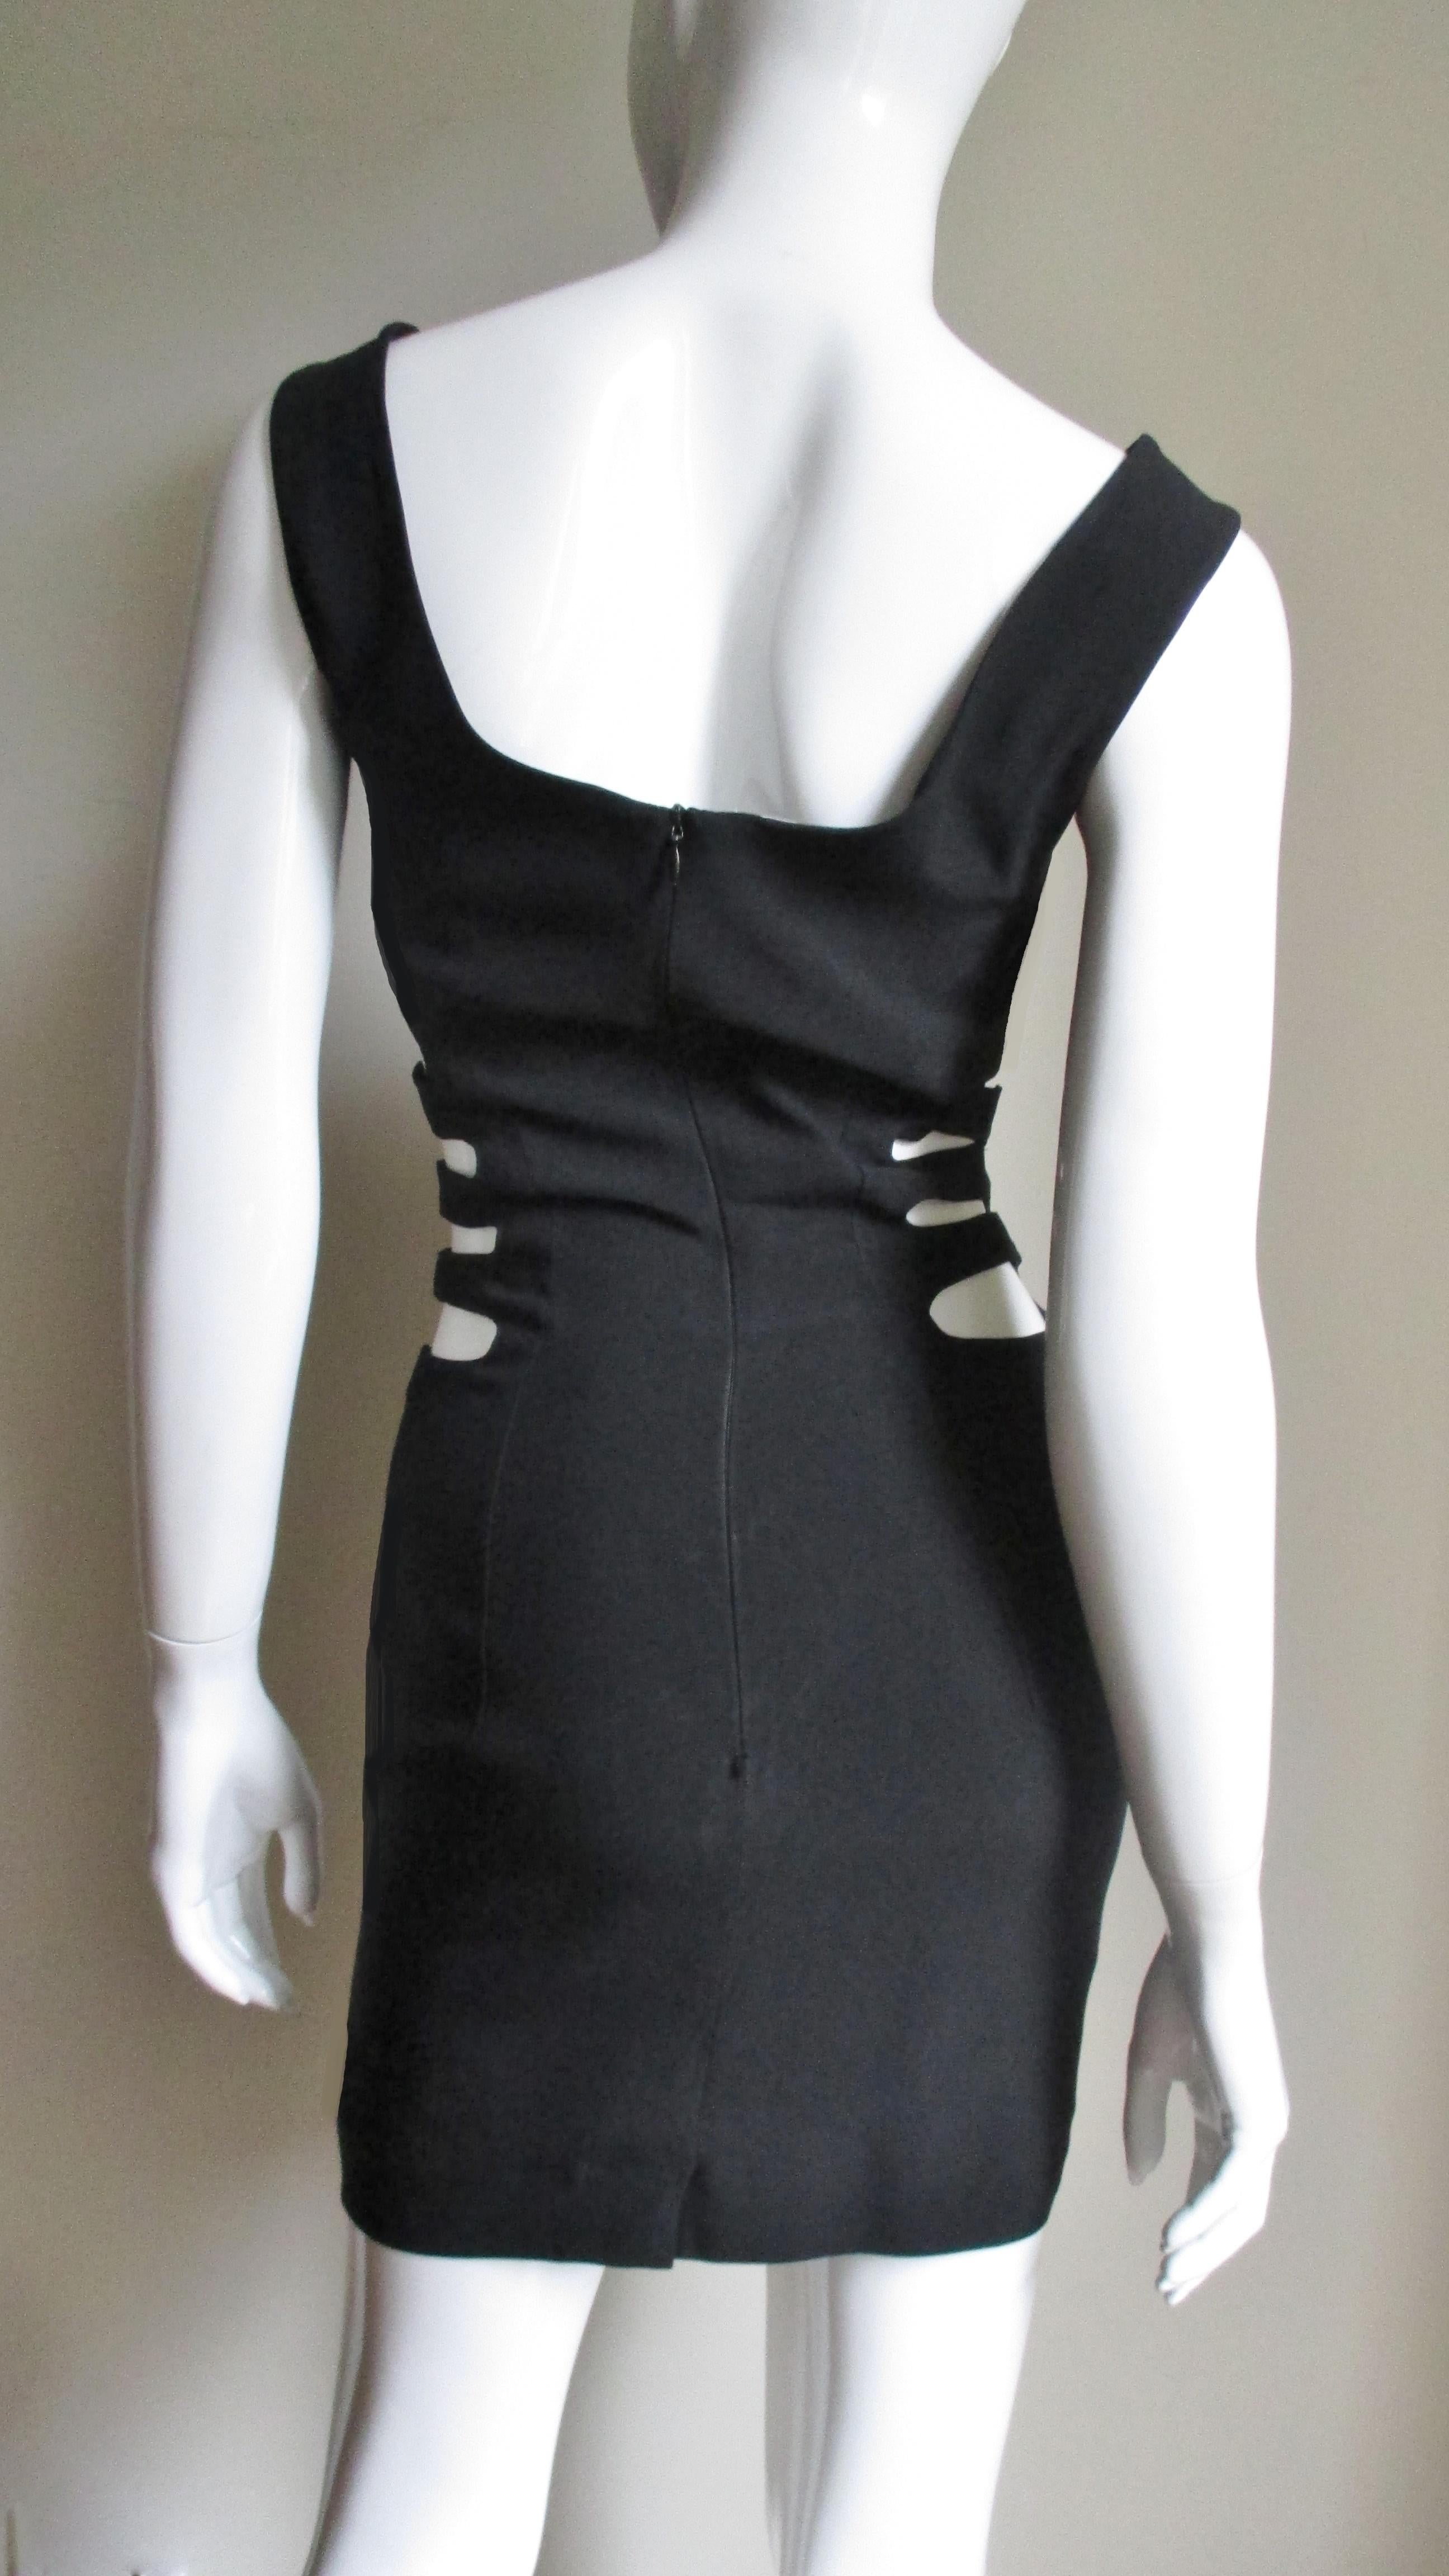 Sophie Sitbon Cage Dress In Excellent Condition For Sale In Water Mill, NY